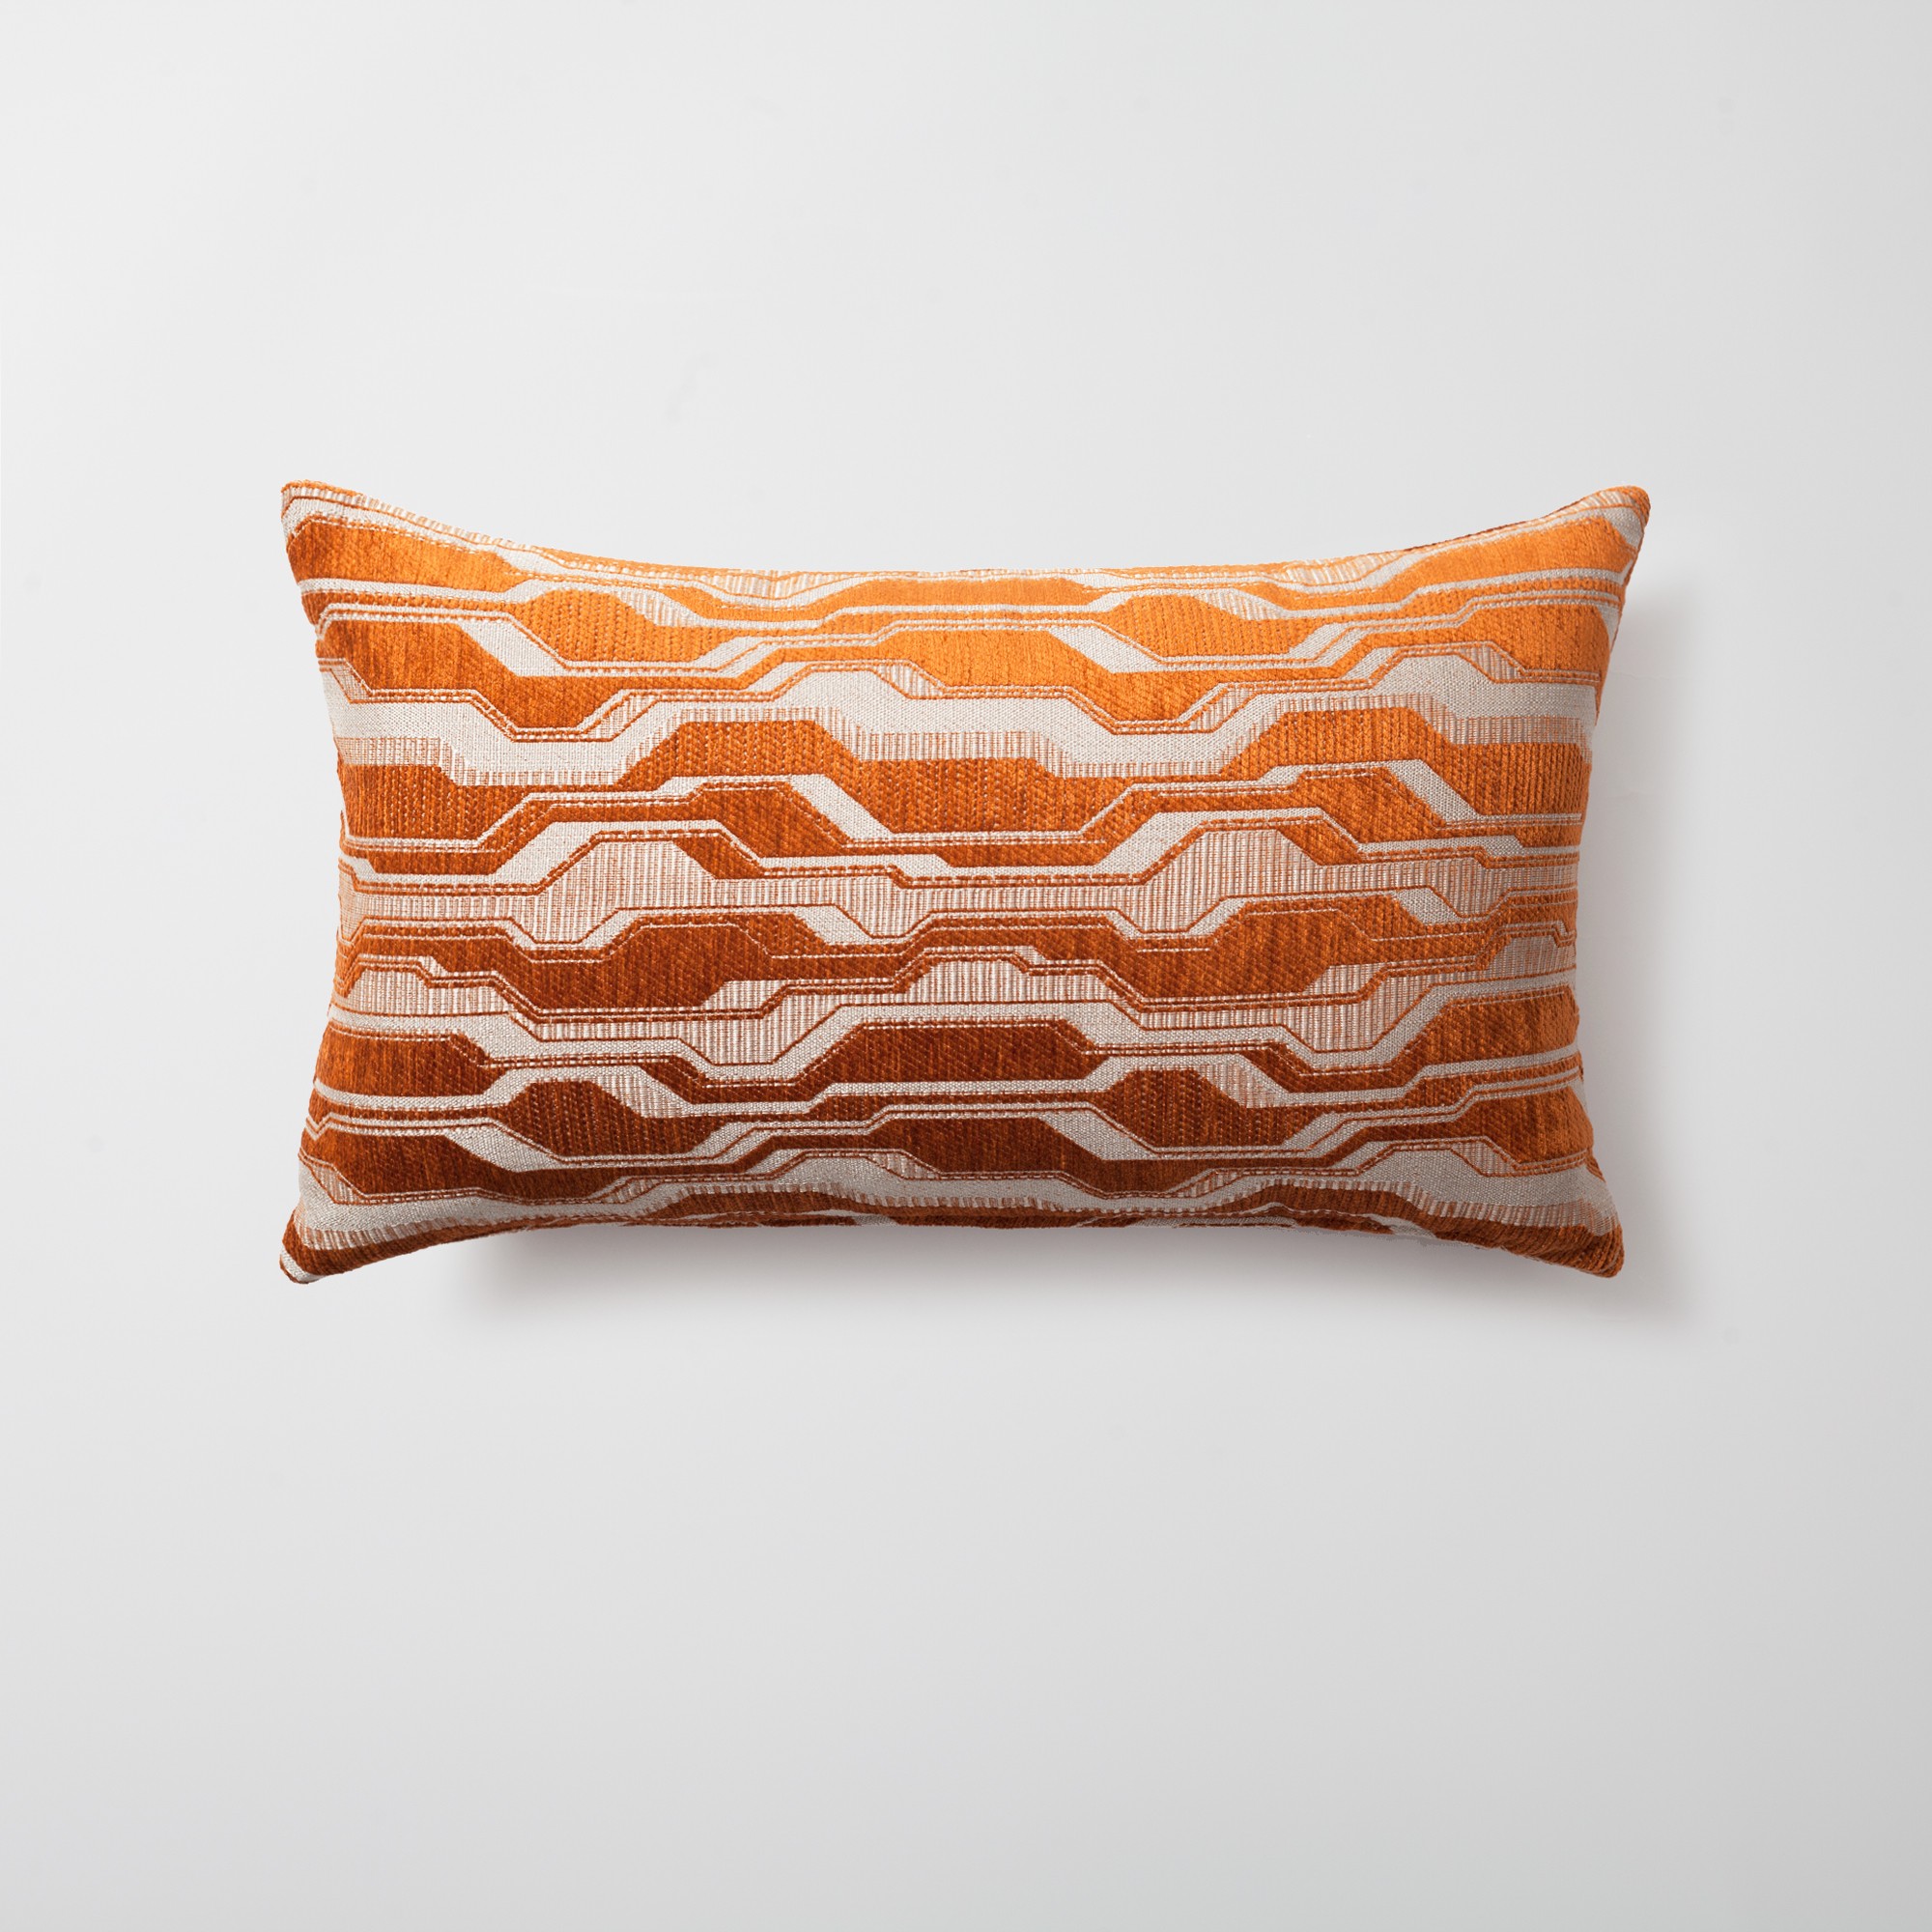 "Lebon" - Geometric Patterned 12x20 Inch Pillow - Orange (Cover Only)